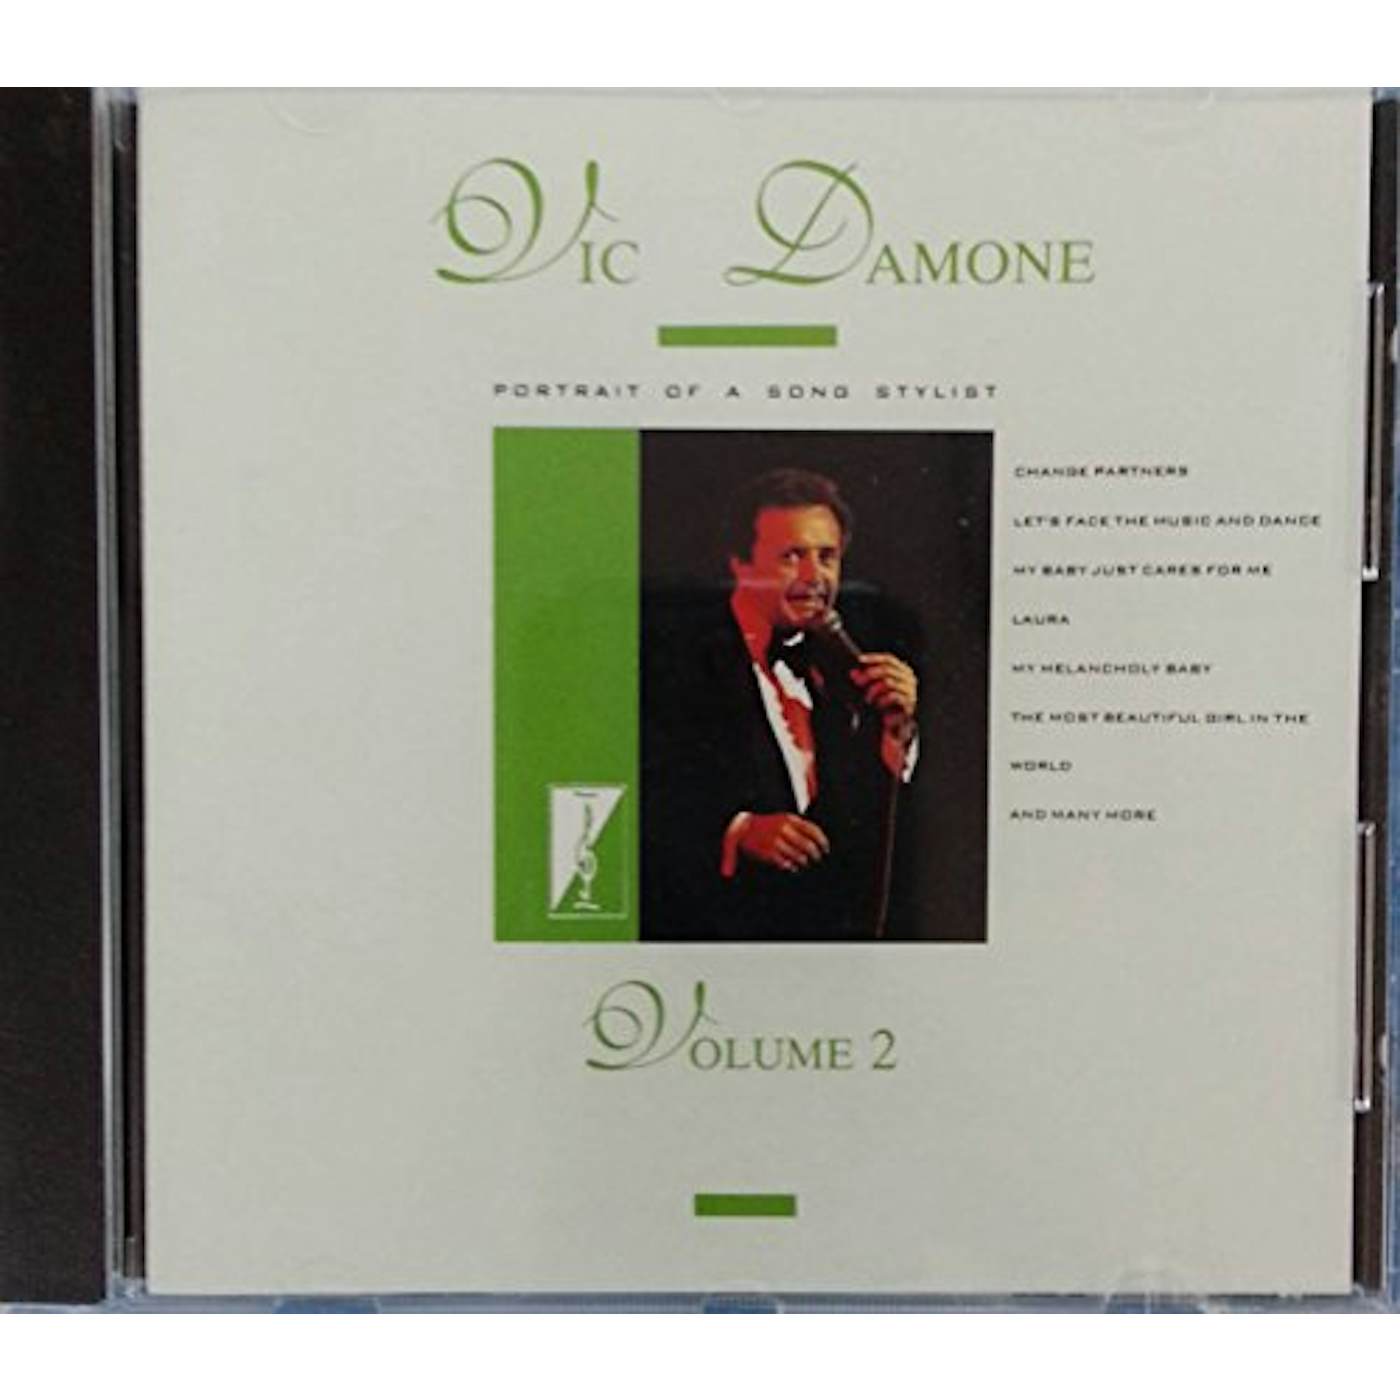 Vic Damone PORTRAIT OF A SONG STYLIST 2 CD